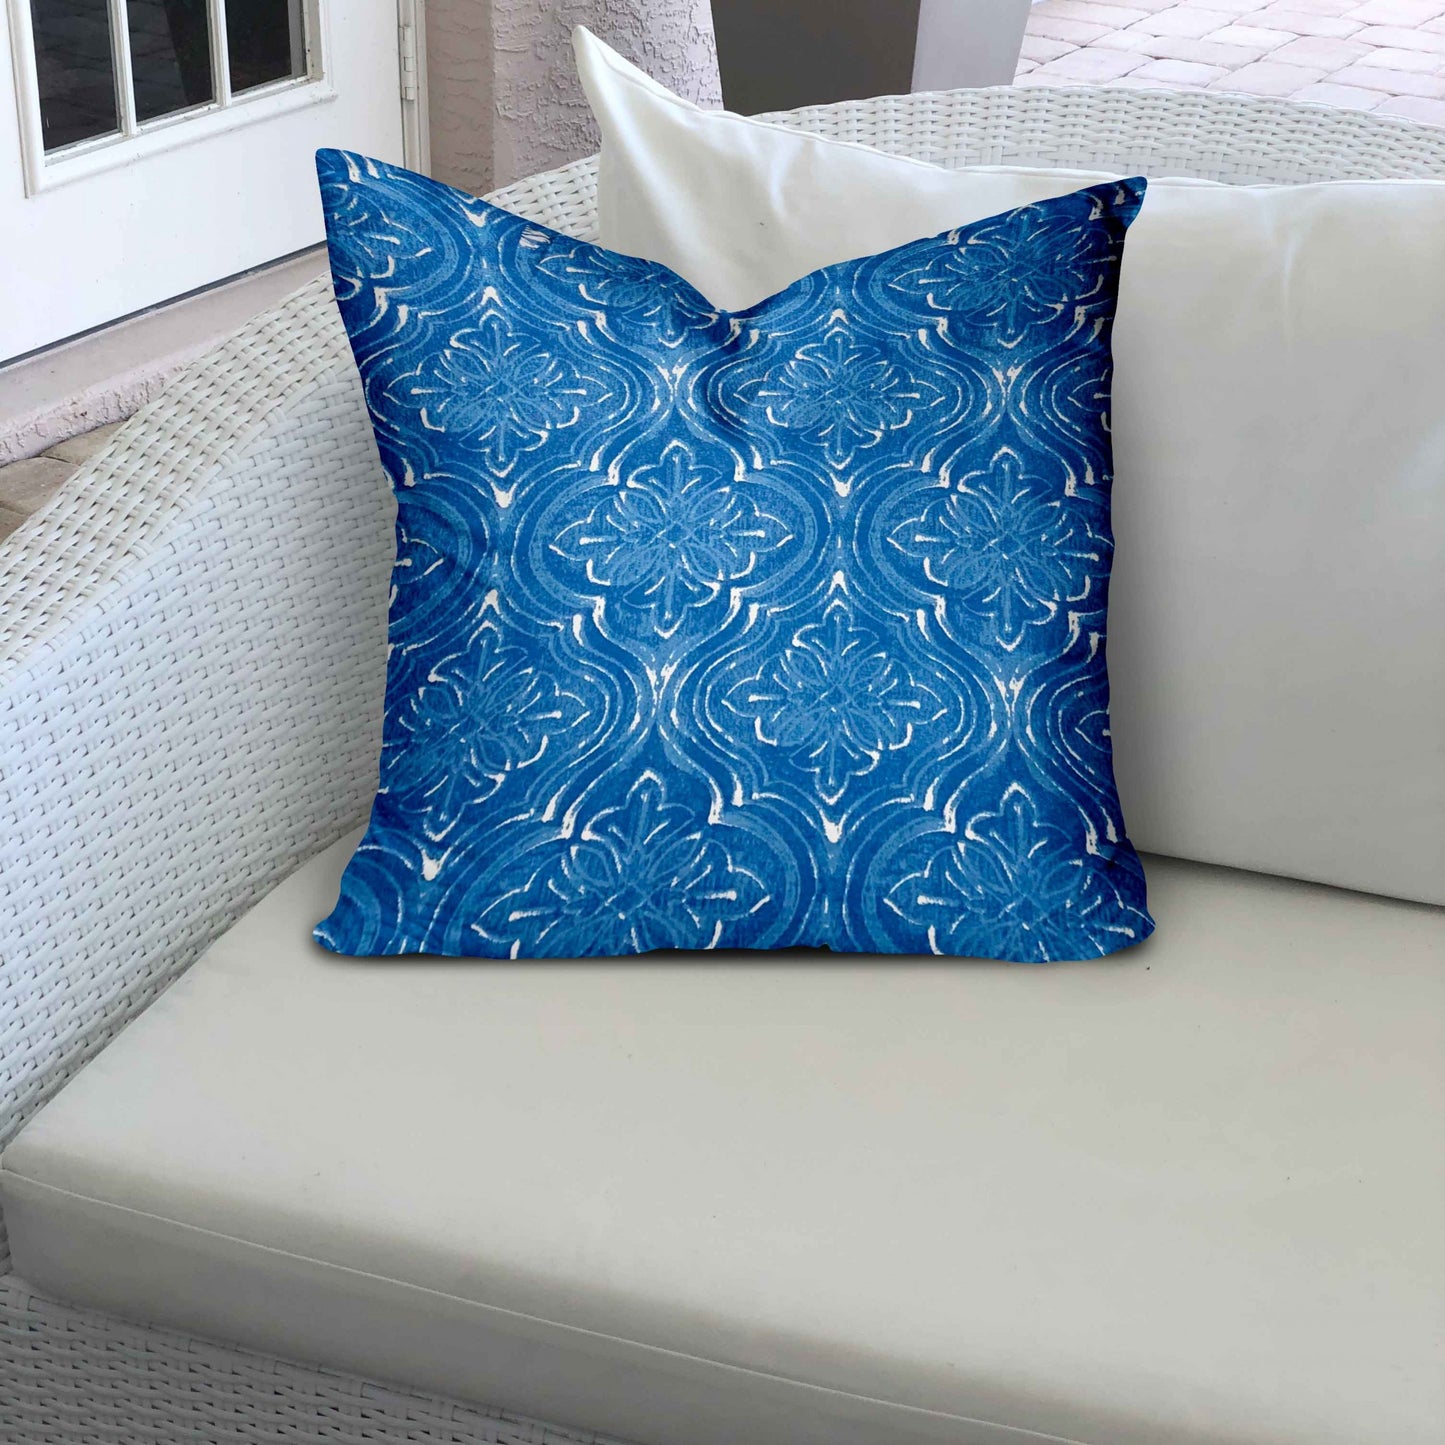 12" X 12" Blue And White Enveloped Ikat Throw Indoor Outdoor Pillow